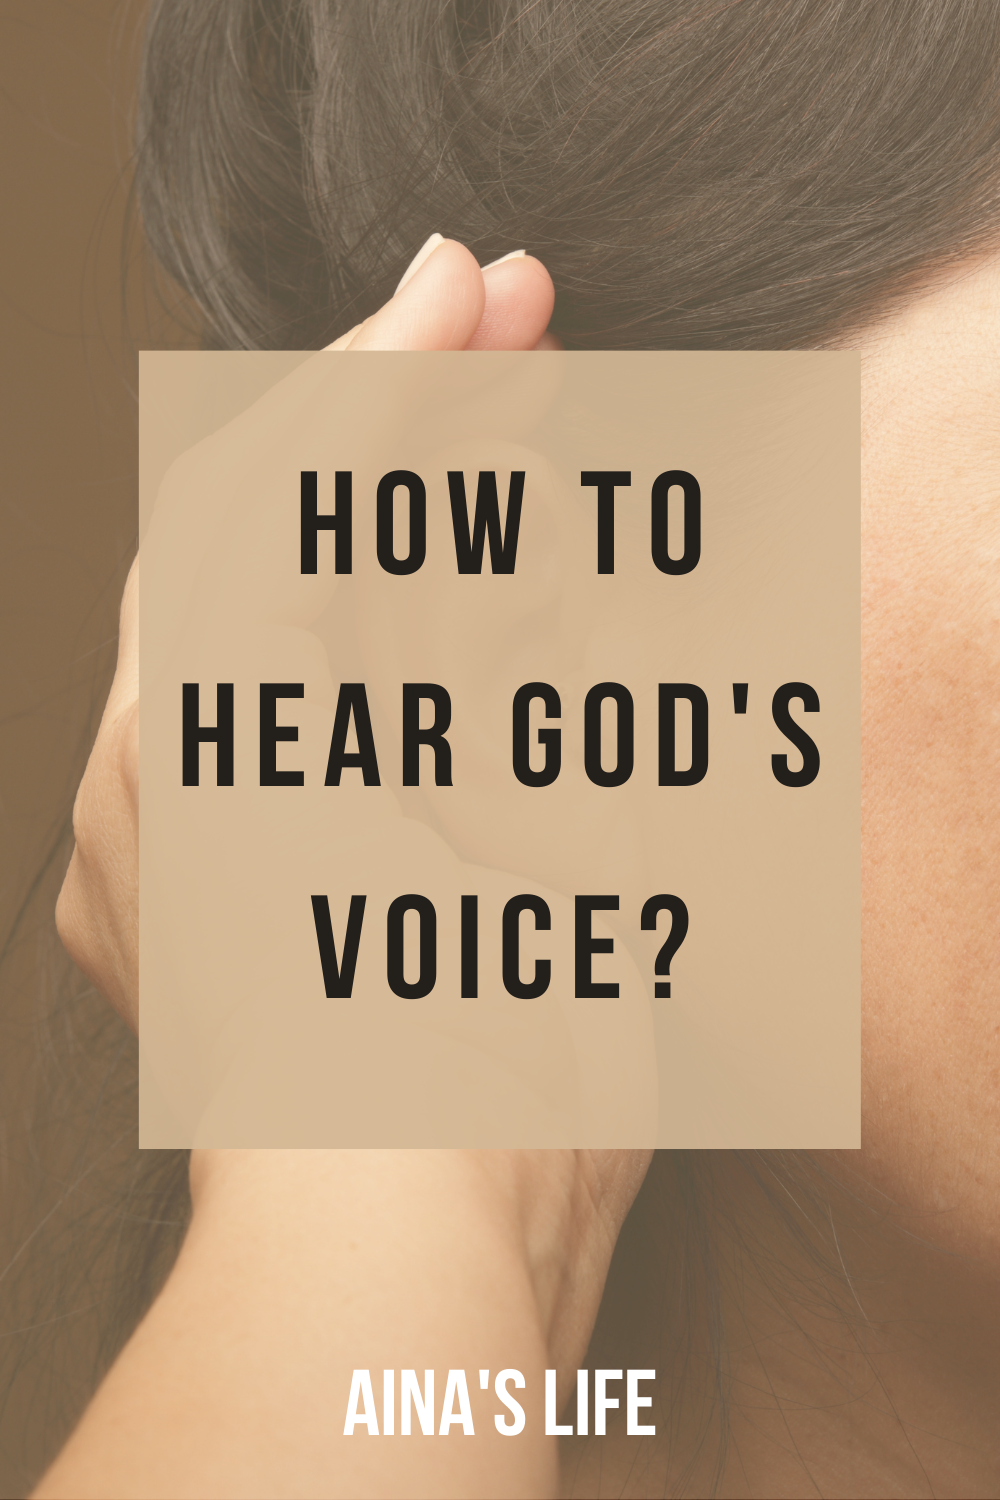 Why I Can’t Hear God’s Voice?